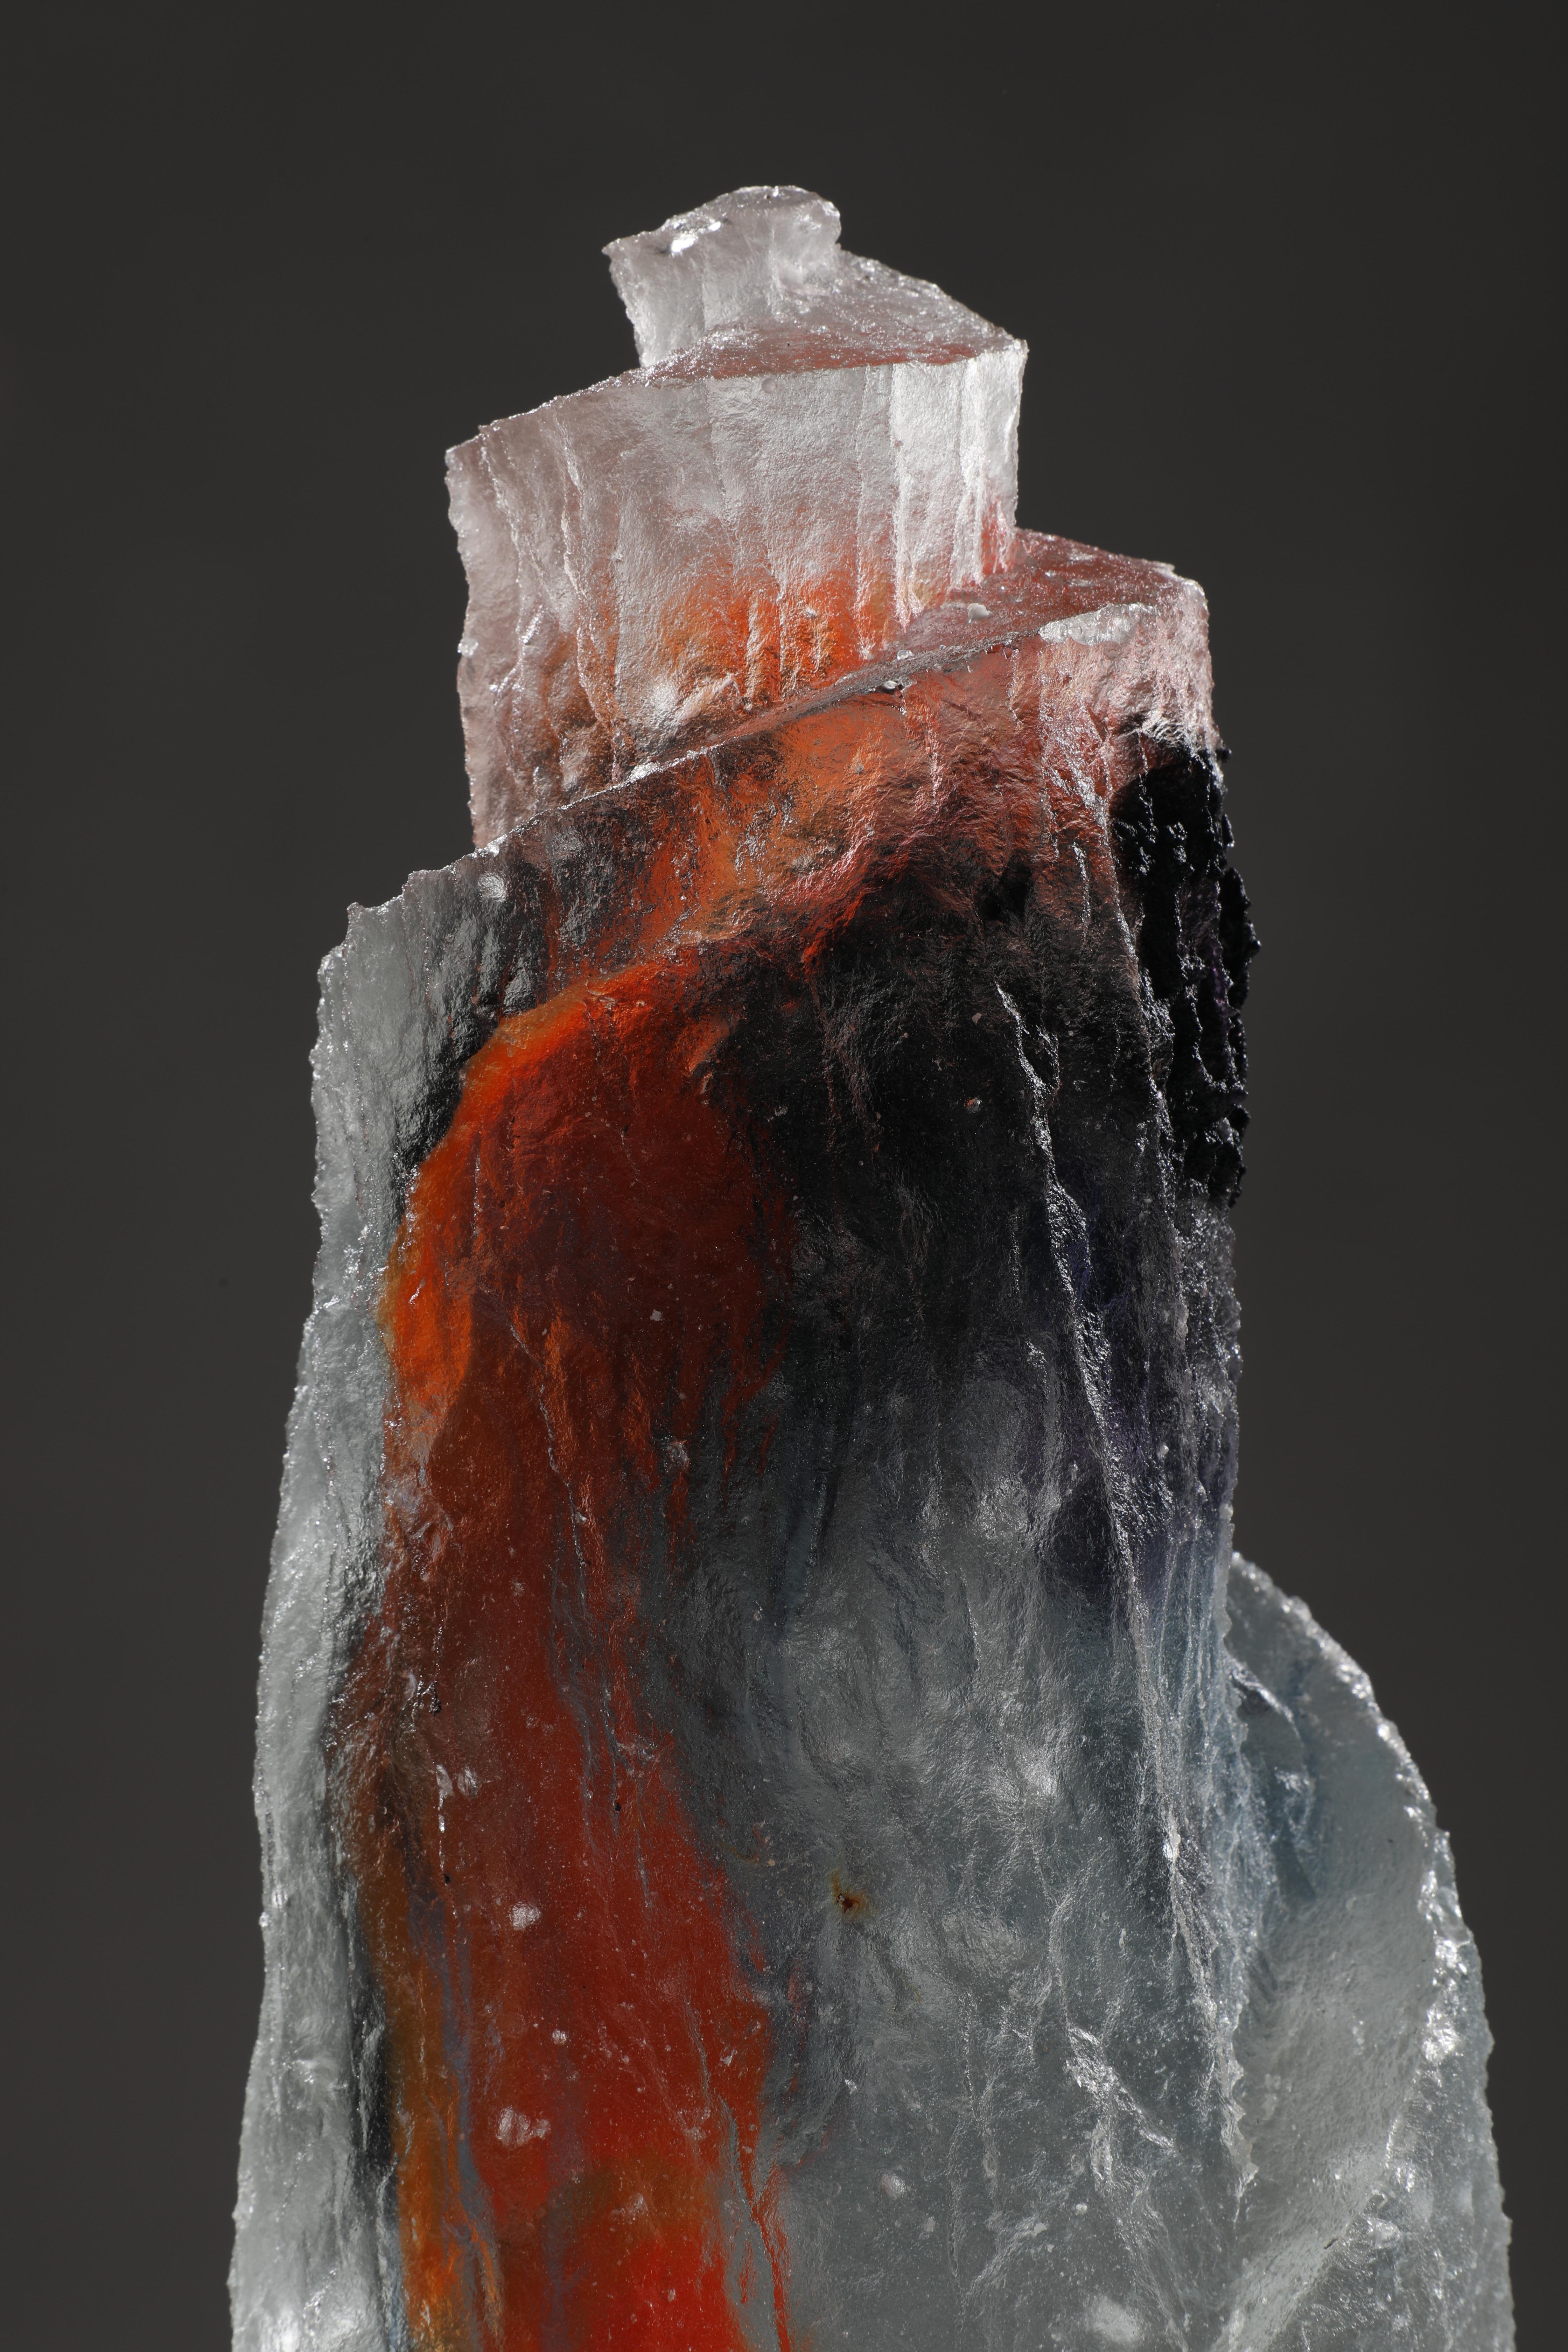 'Al Safi' is a contemporary abstract cast glass sculpture by David Ruth from his Internal Space series.  This part of the series was inspired by astronomy and the distant galaxies and stars. David fused of various colored glass creates a layered,